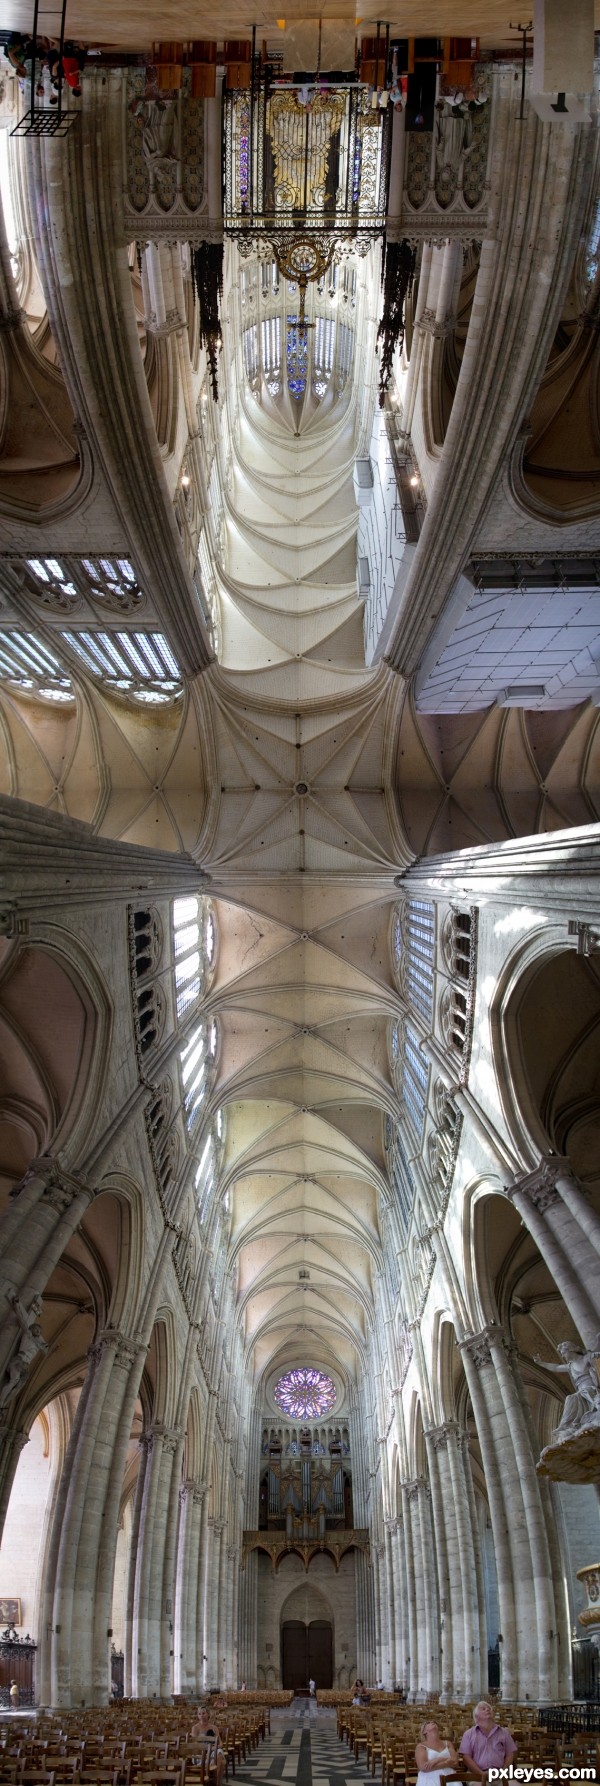 Creation of Amiens Cathedrale: Final Result